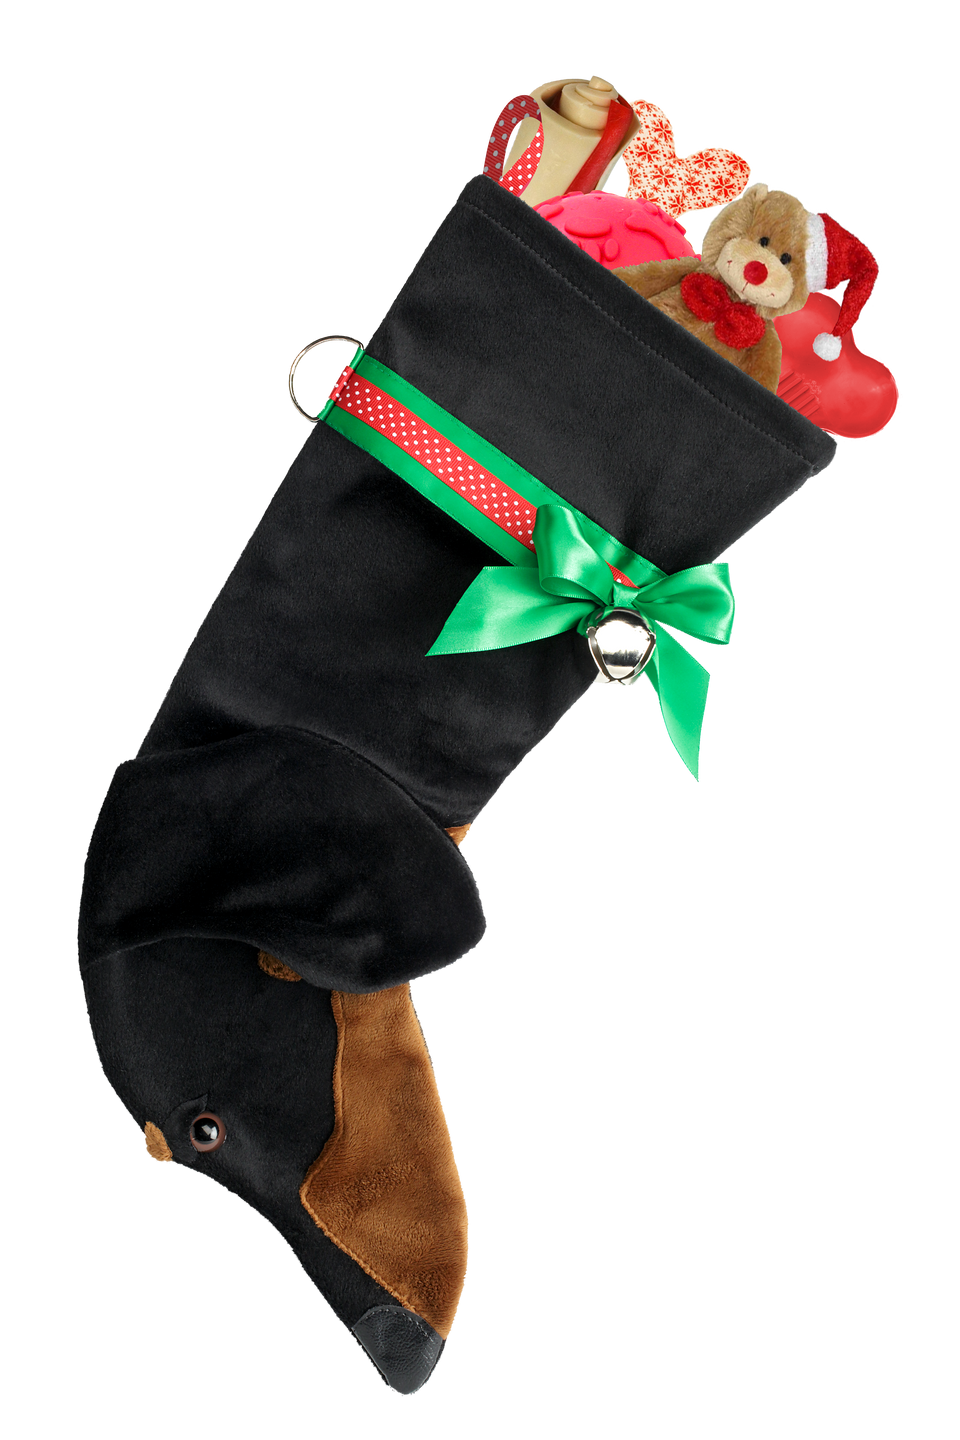 This Black and Tan Dachshund dog Christmas stocking is perfect for stuffing toys and treats into to spoil your fur baby for Christmas, or whatever holiday you celebrate!